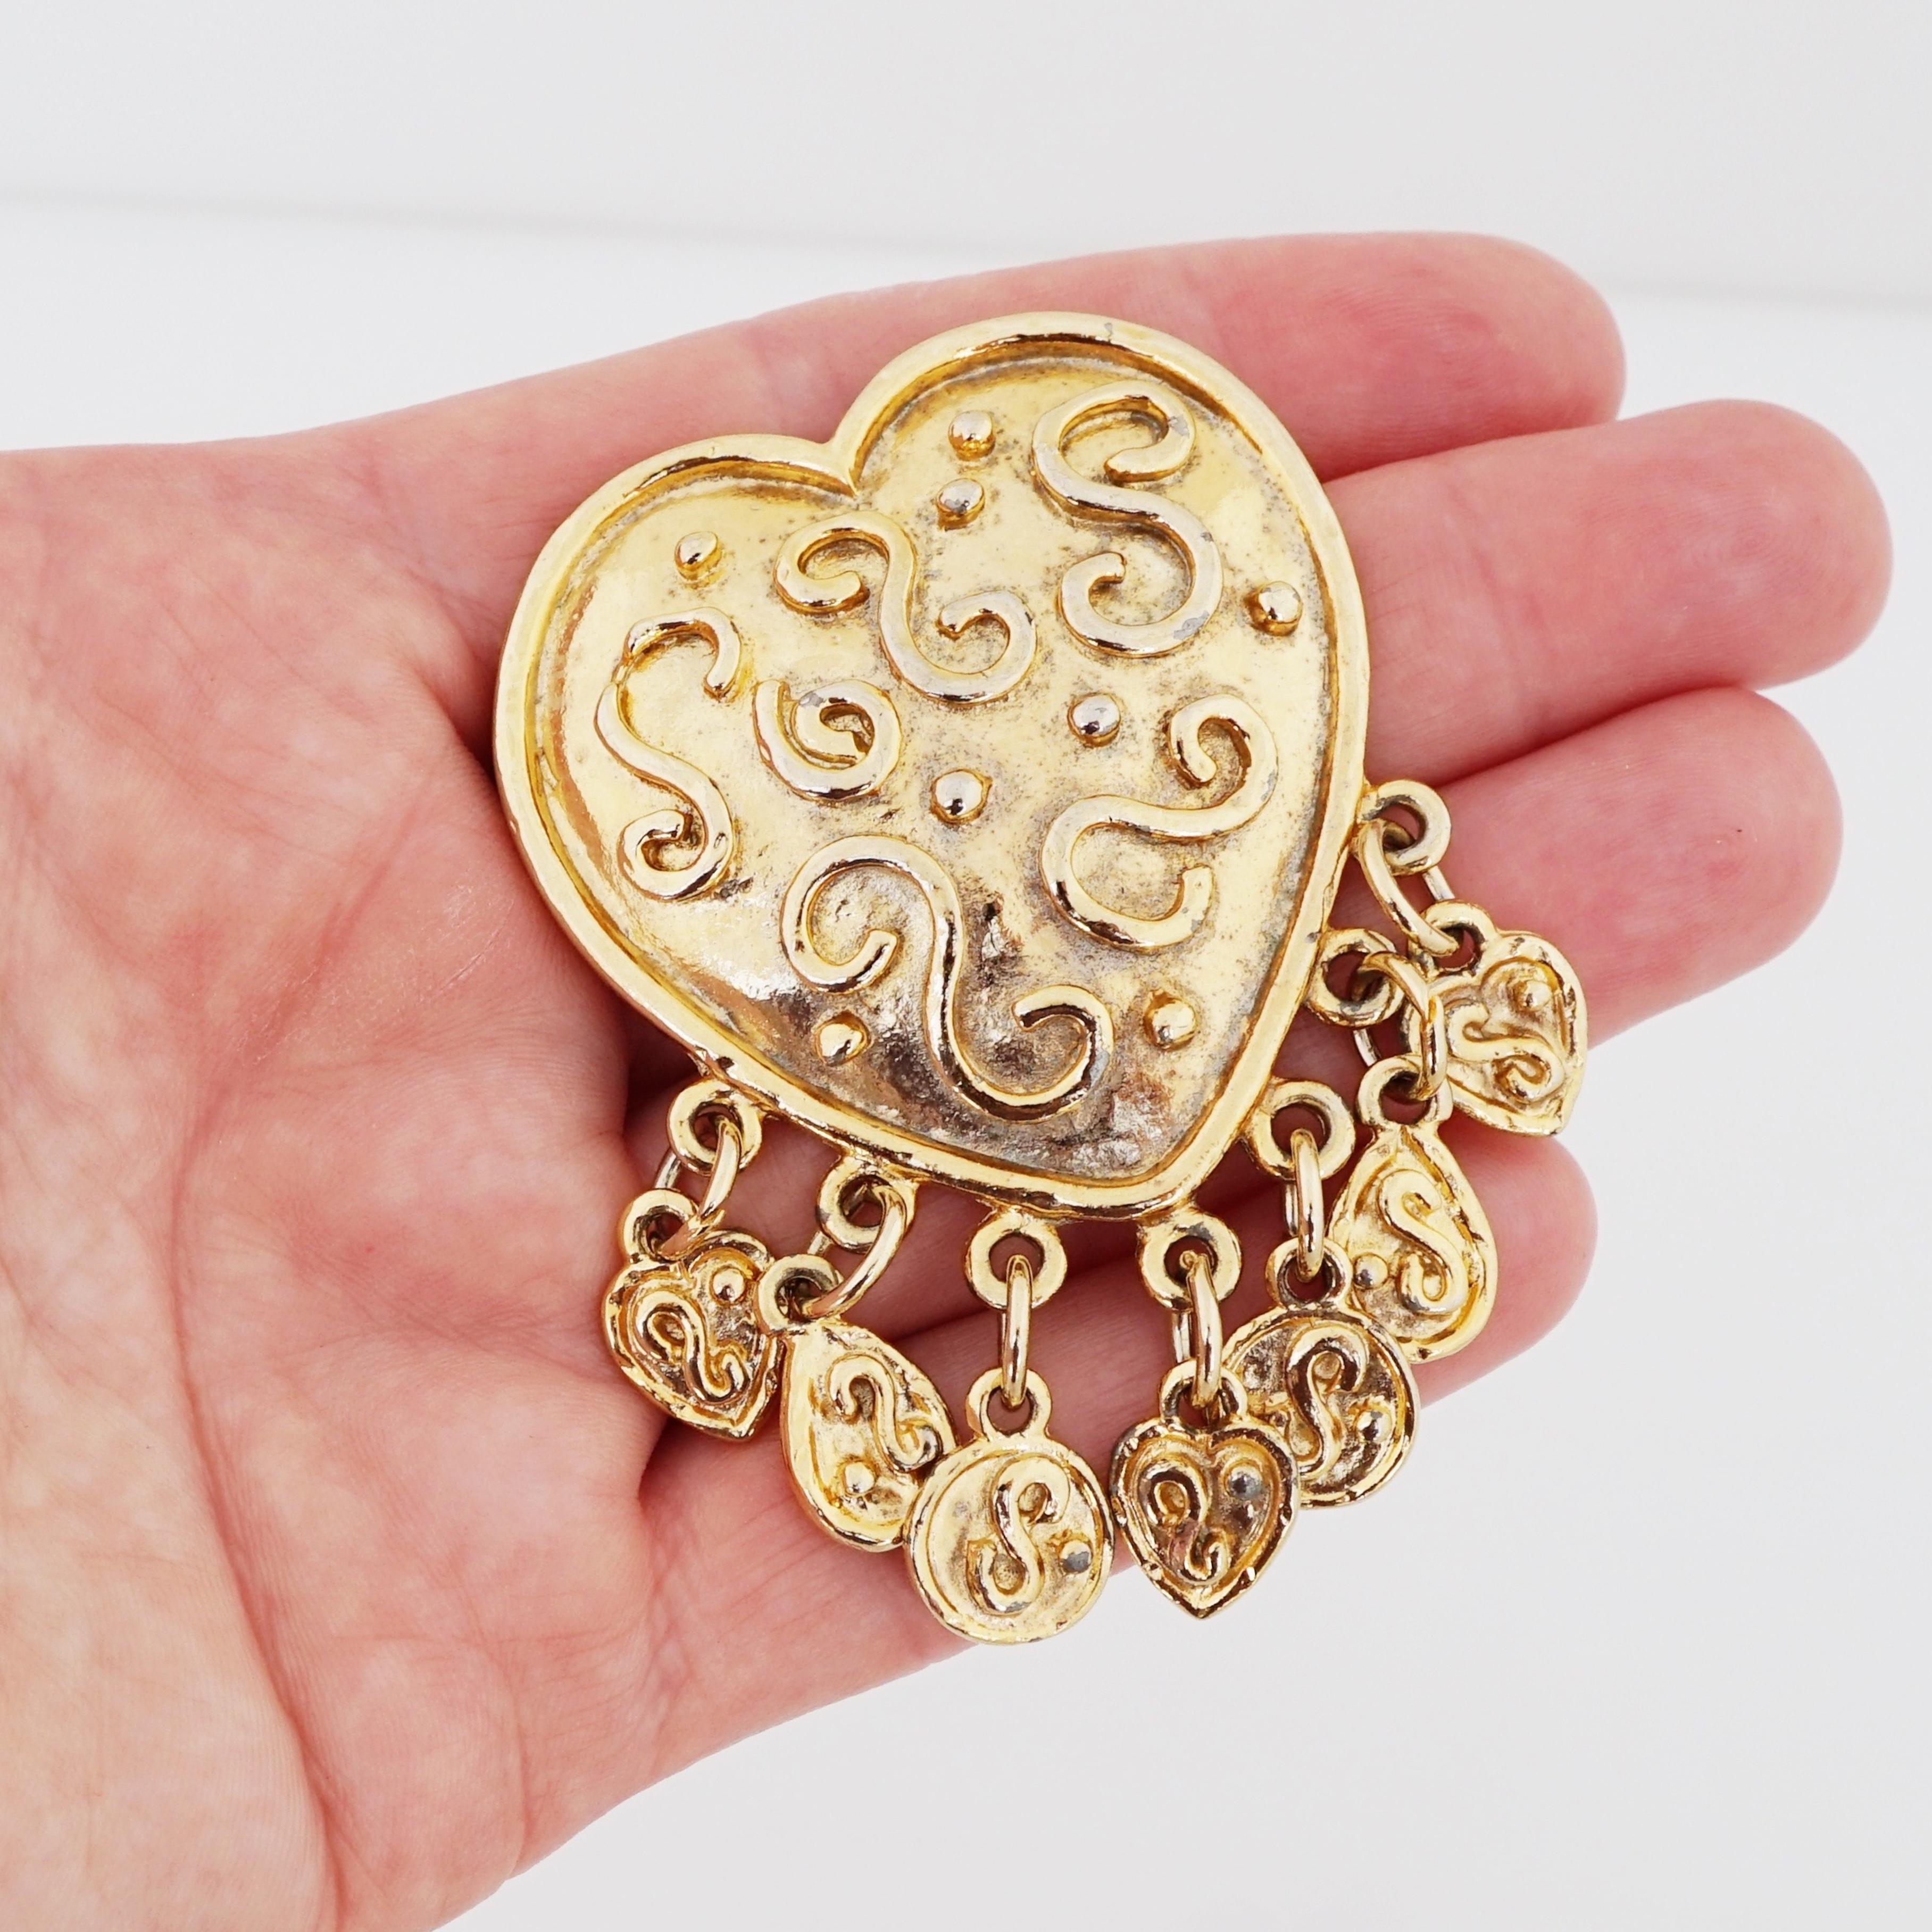 1990s Gilded Heart Brooch w/ Scroll Details & Dangle Accents By Edouard Rambaud In Good Condition For Sale In McKinney, TX